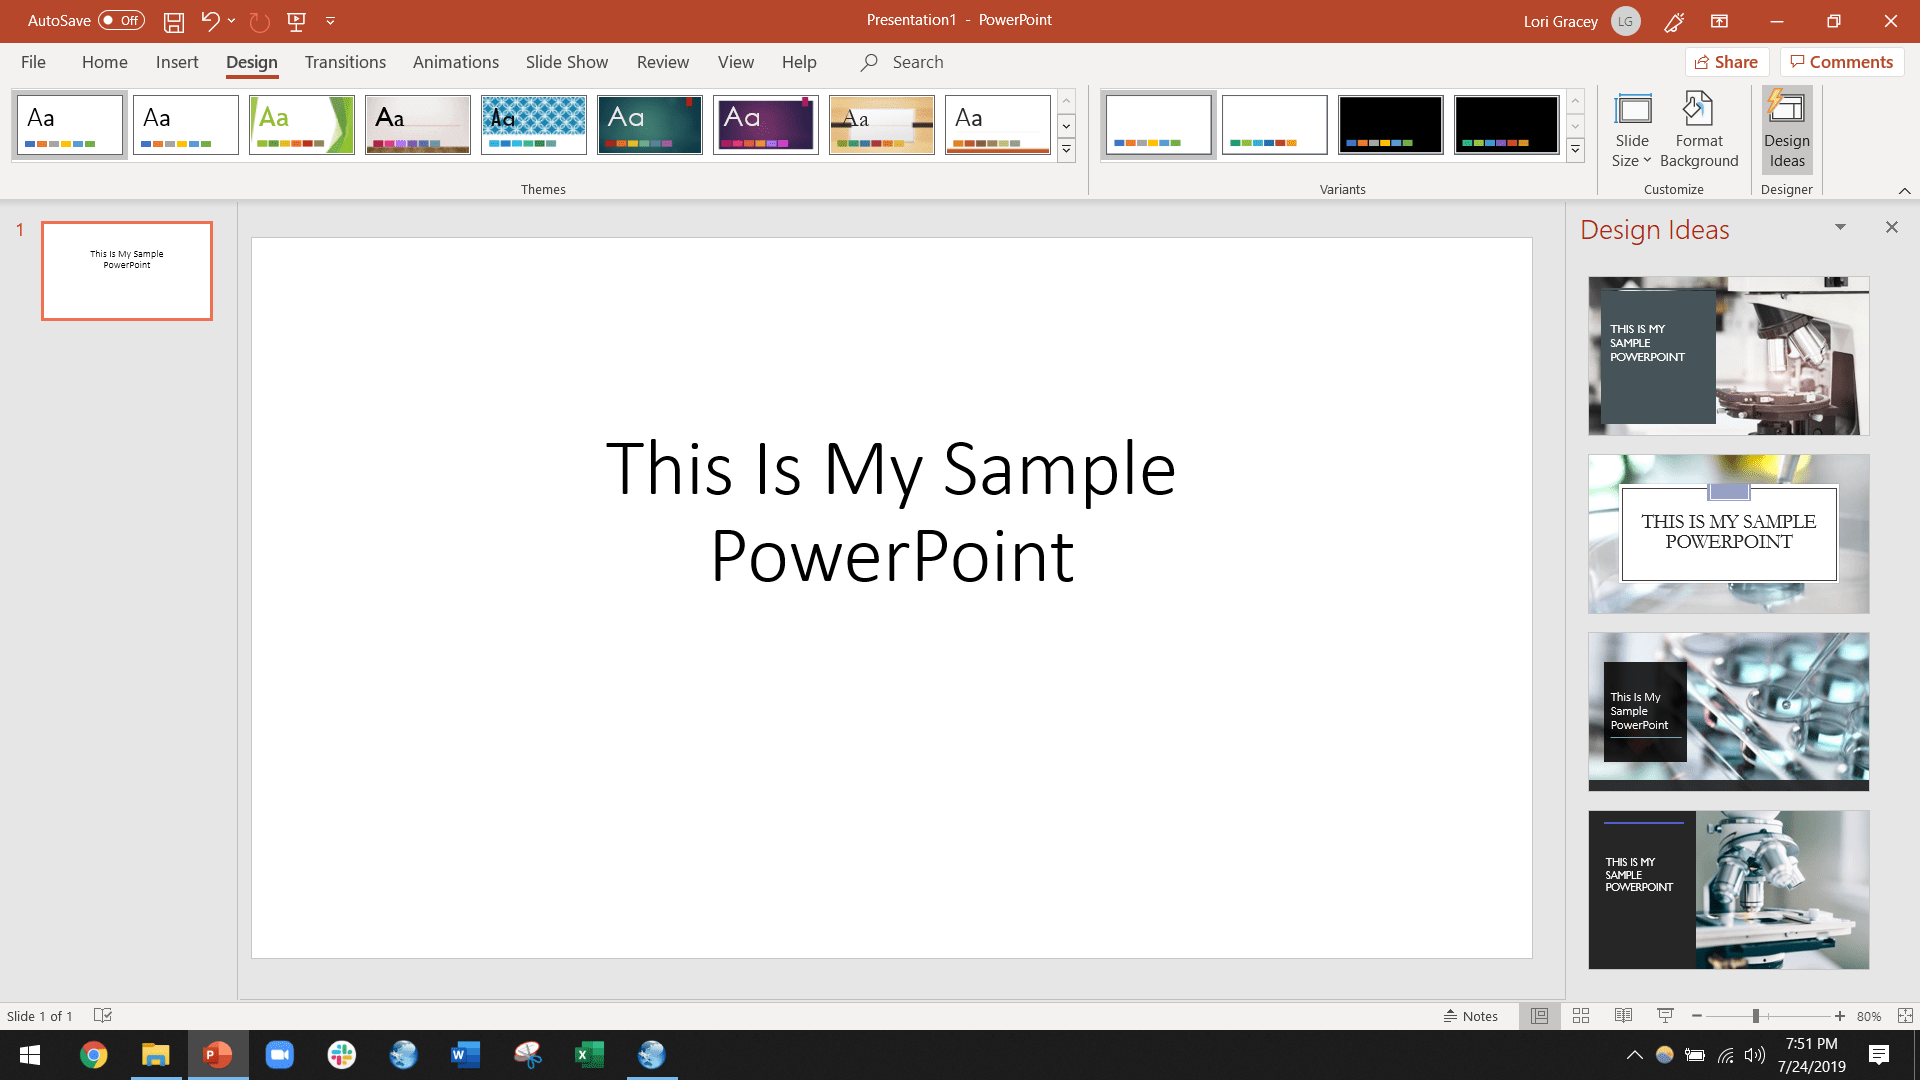 PowerPoint features